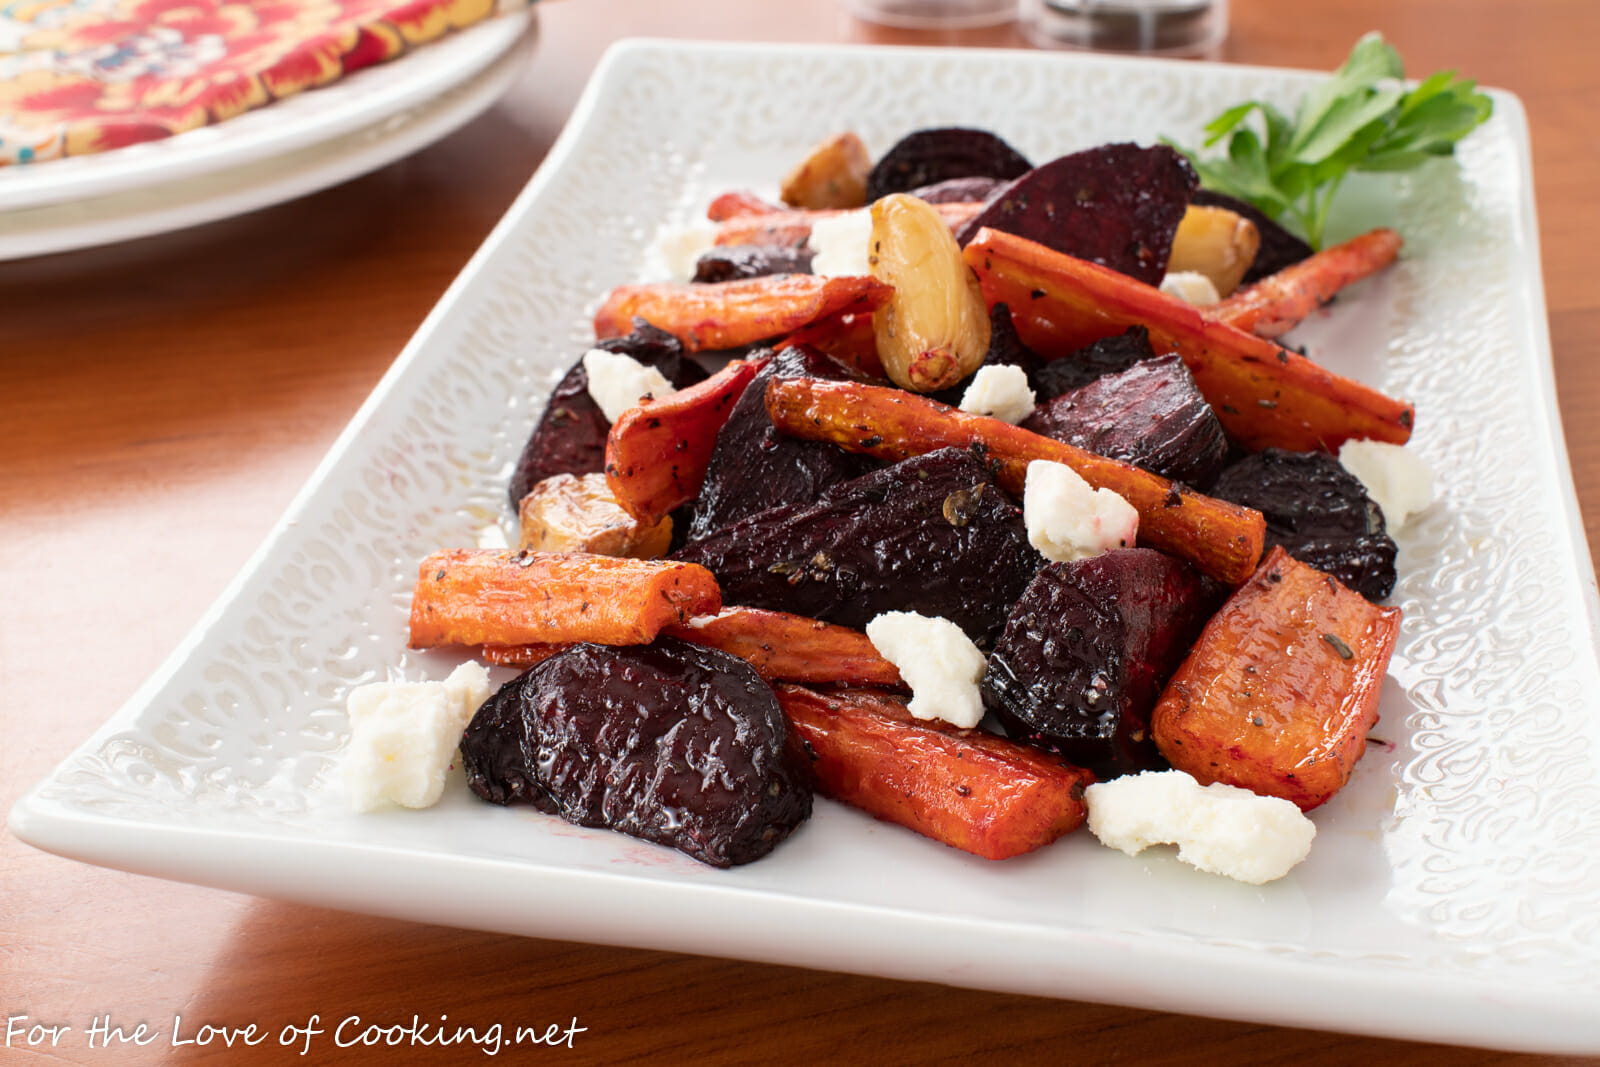 Roasted Beets and Carrots with Feta